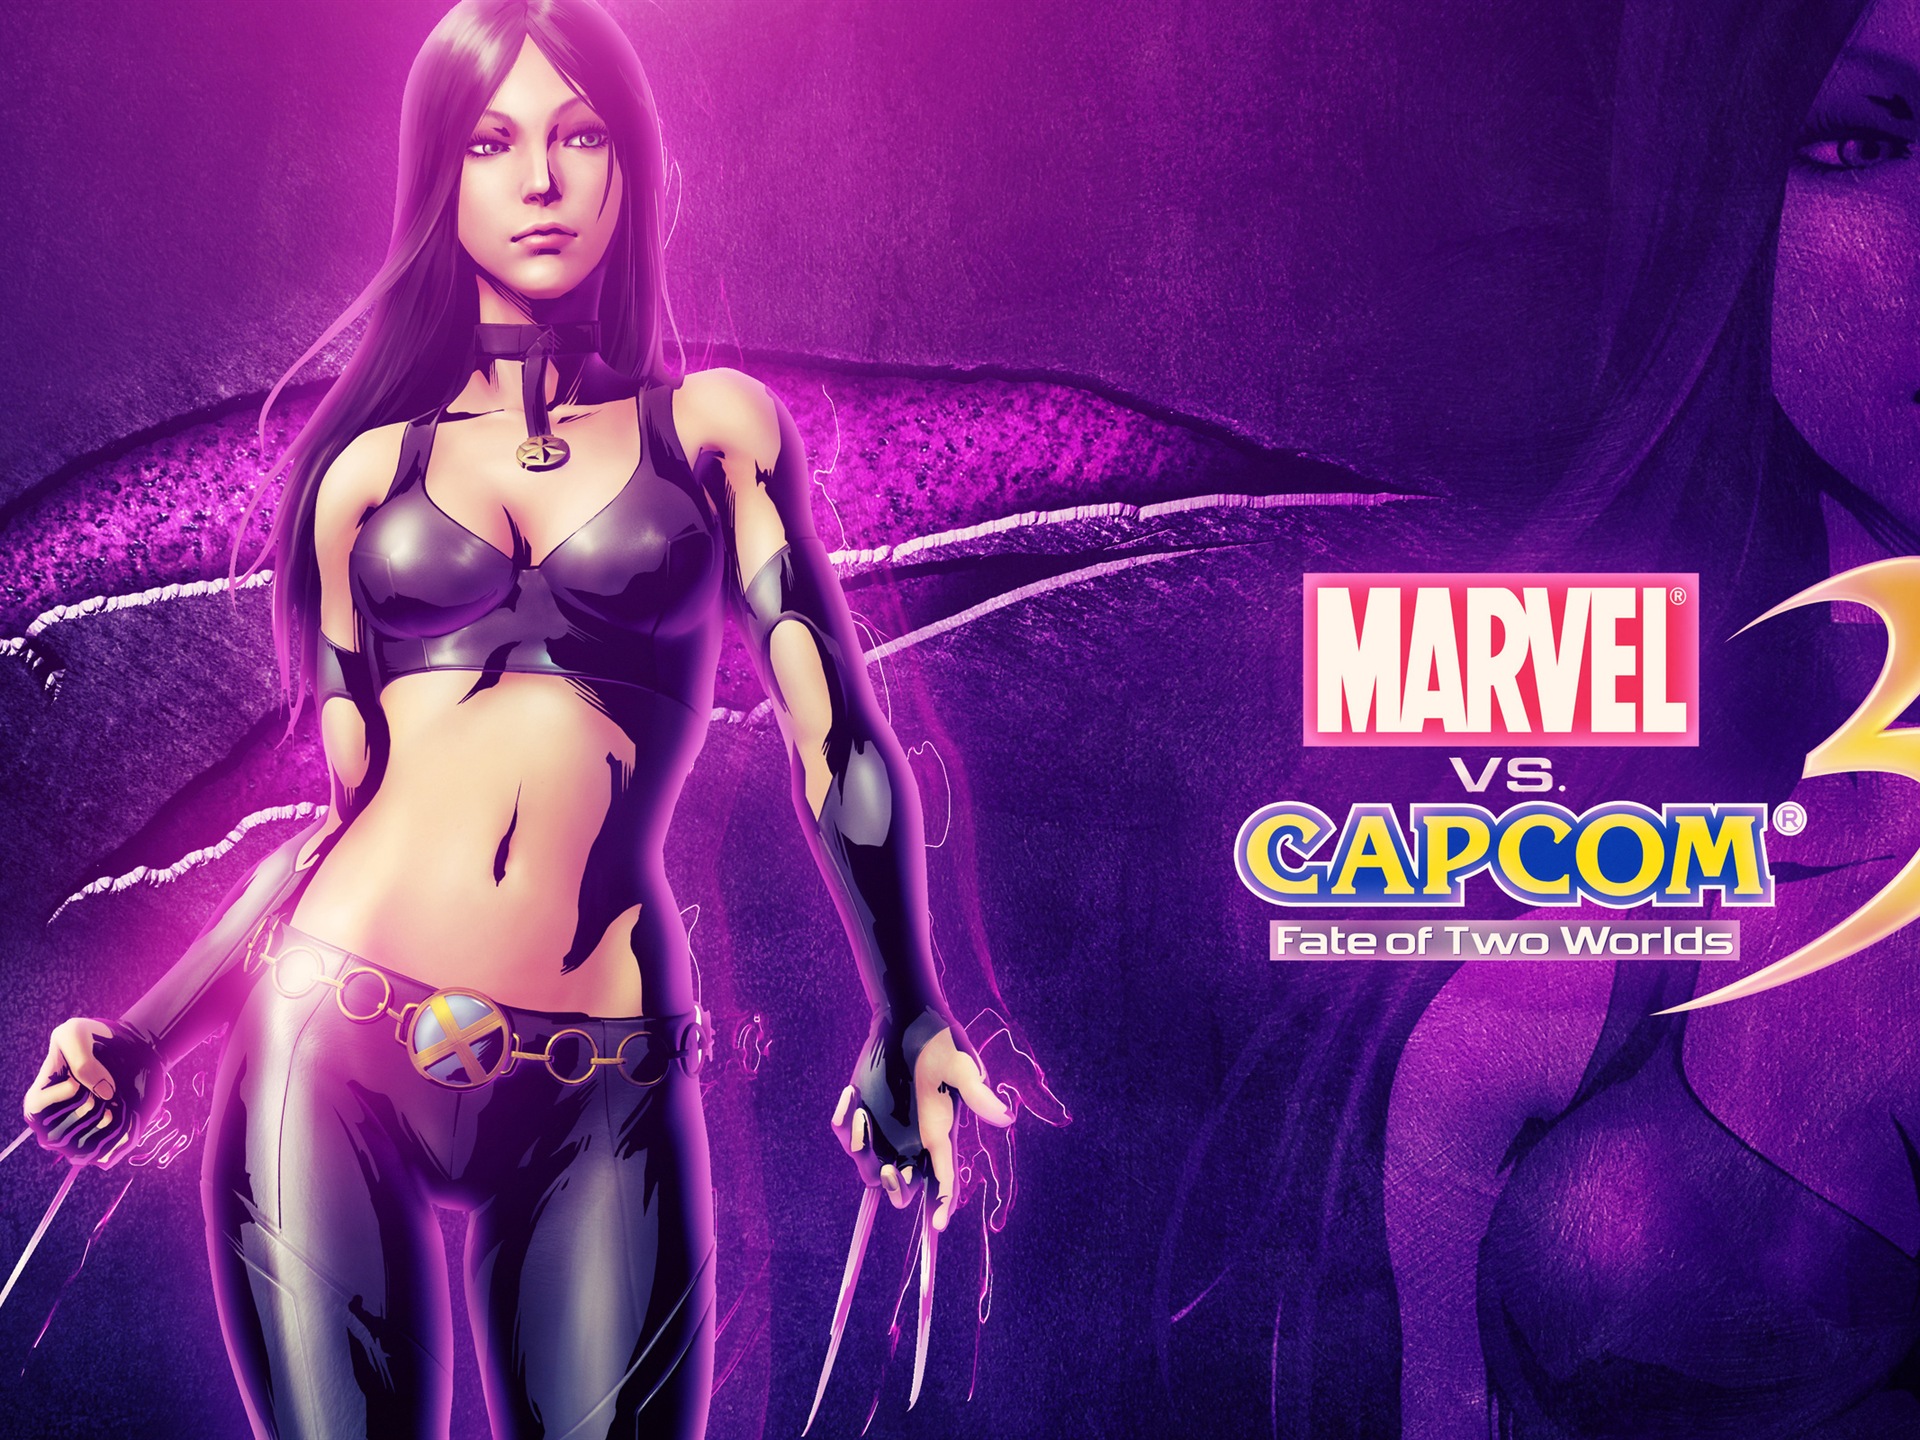 Marvel VS. Capcom 3: Fate of Two Worlds HD game wallpapers #10 - 1920x1440